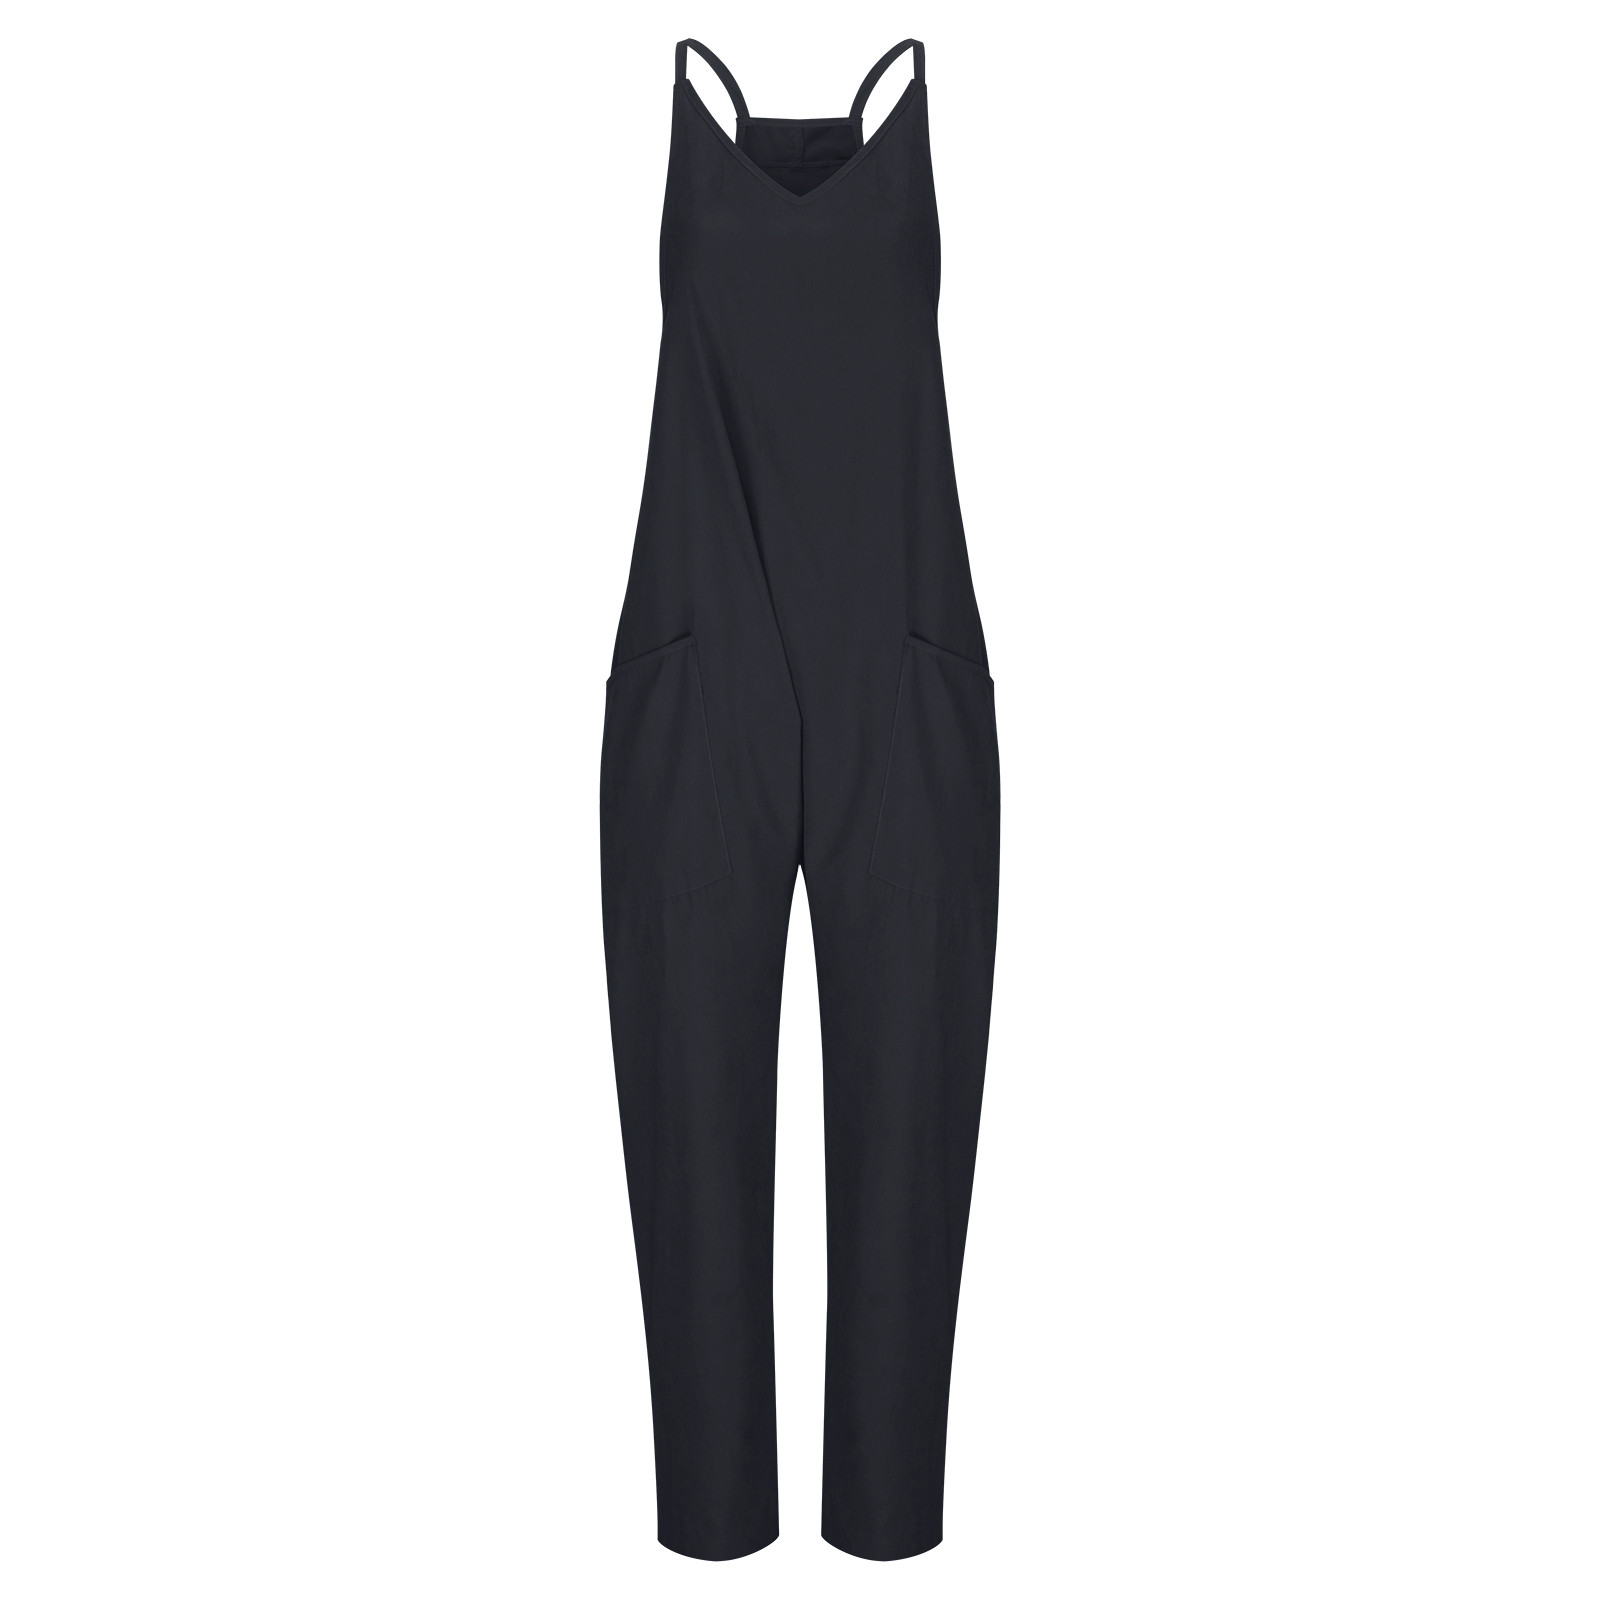 aoksee Women's Loose Casual V Neck Sleeveless Jumpsuits Spaghetti Straps Long Pants Overalls With Pockets,Black - image 3 of 4